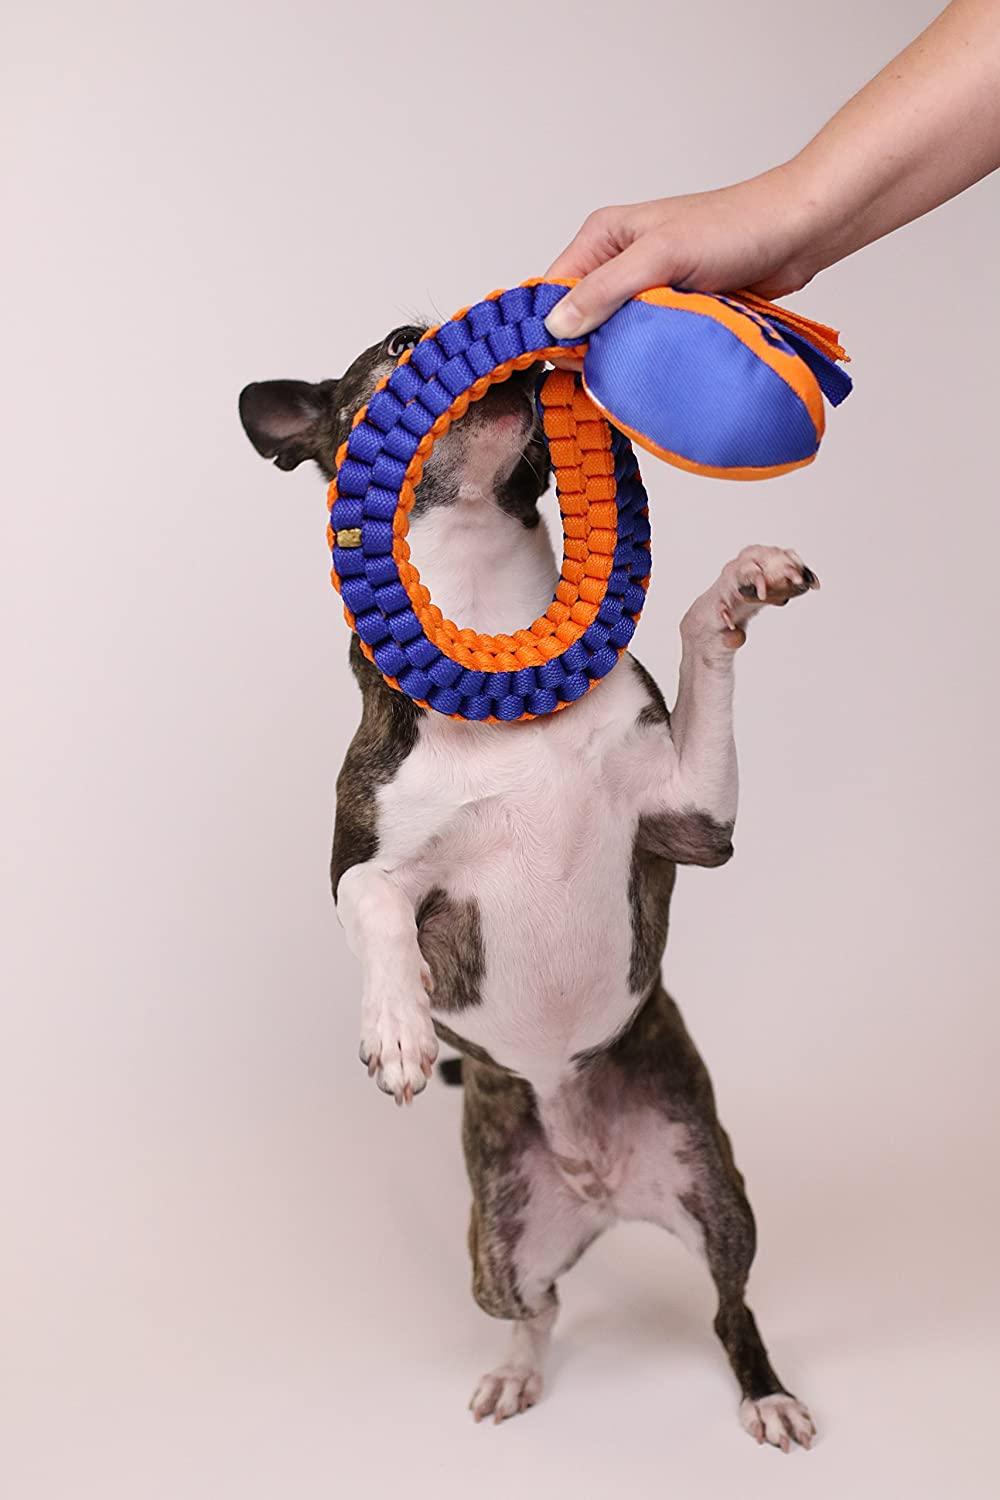 Dog Toy Doobie, Joint Funny Dog Toy, Cool Dog Toys, Gifts For Dogs, Funny Squeaky Dog Toys, Novelty Dog Toys